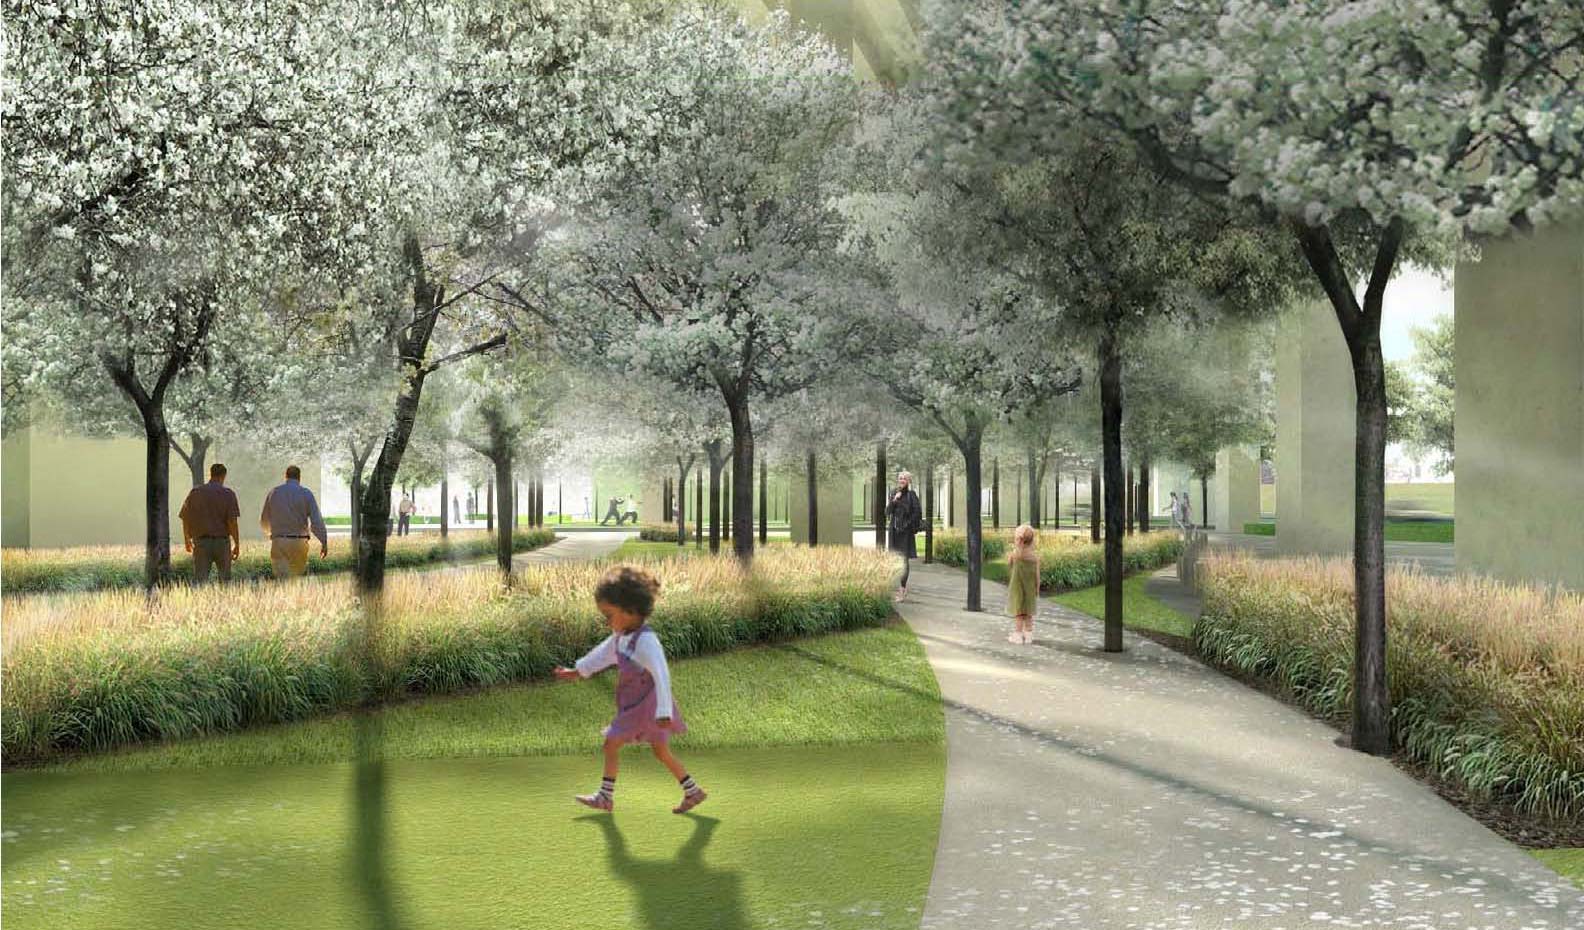 an artist's rendering of a park with trees and people walking.